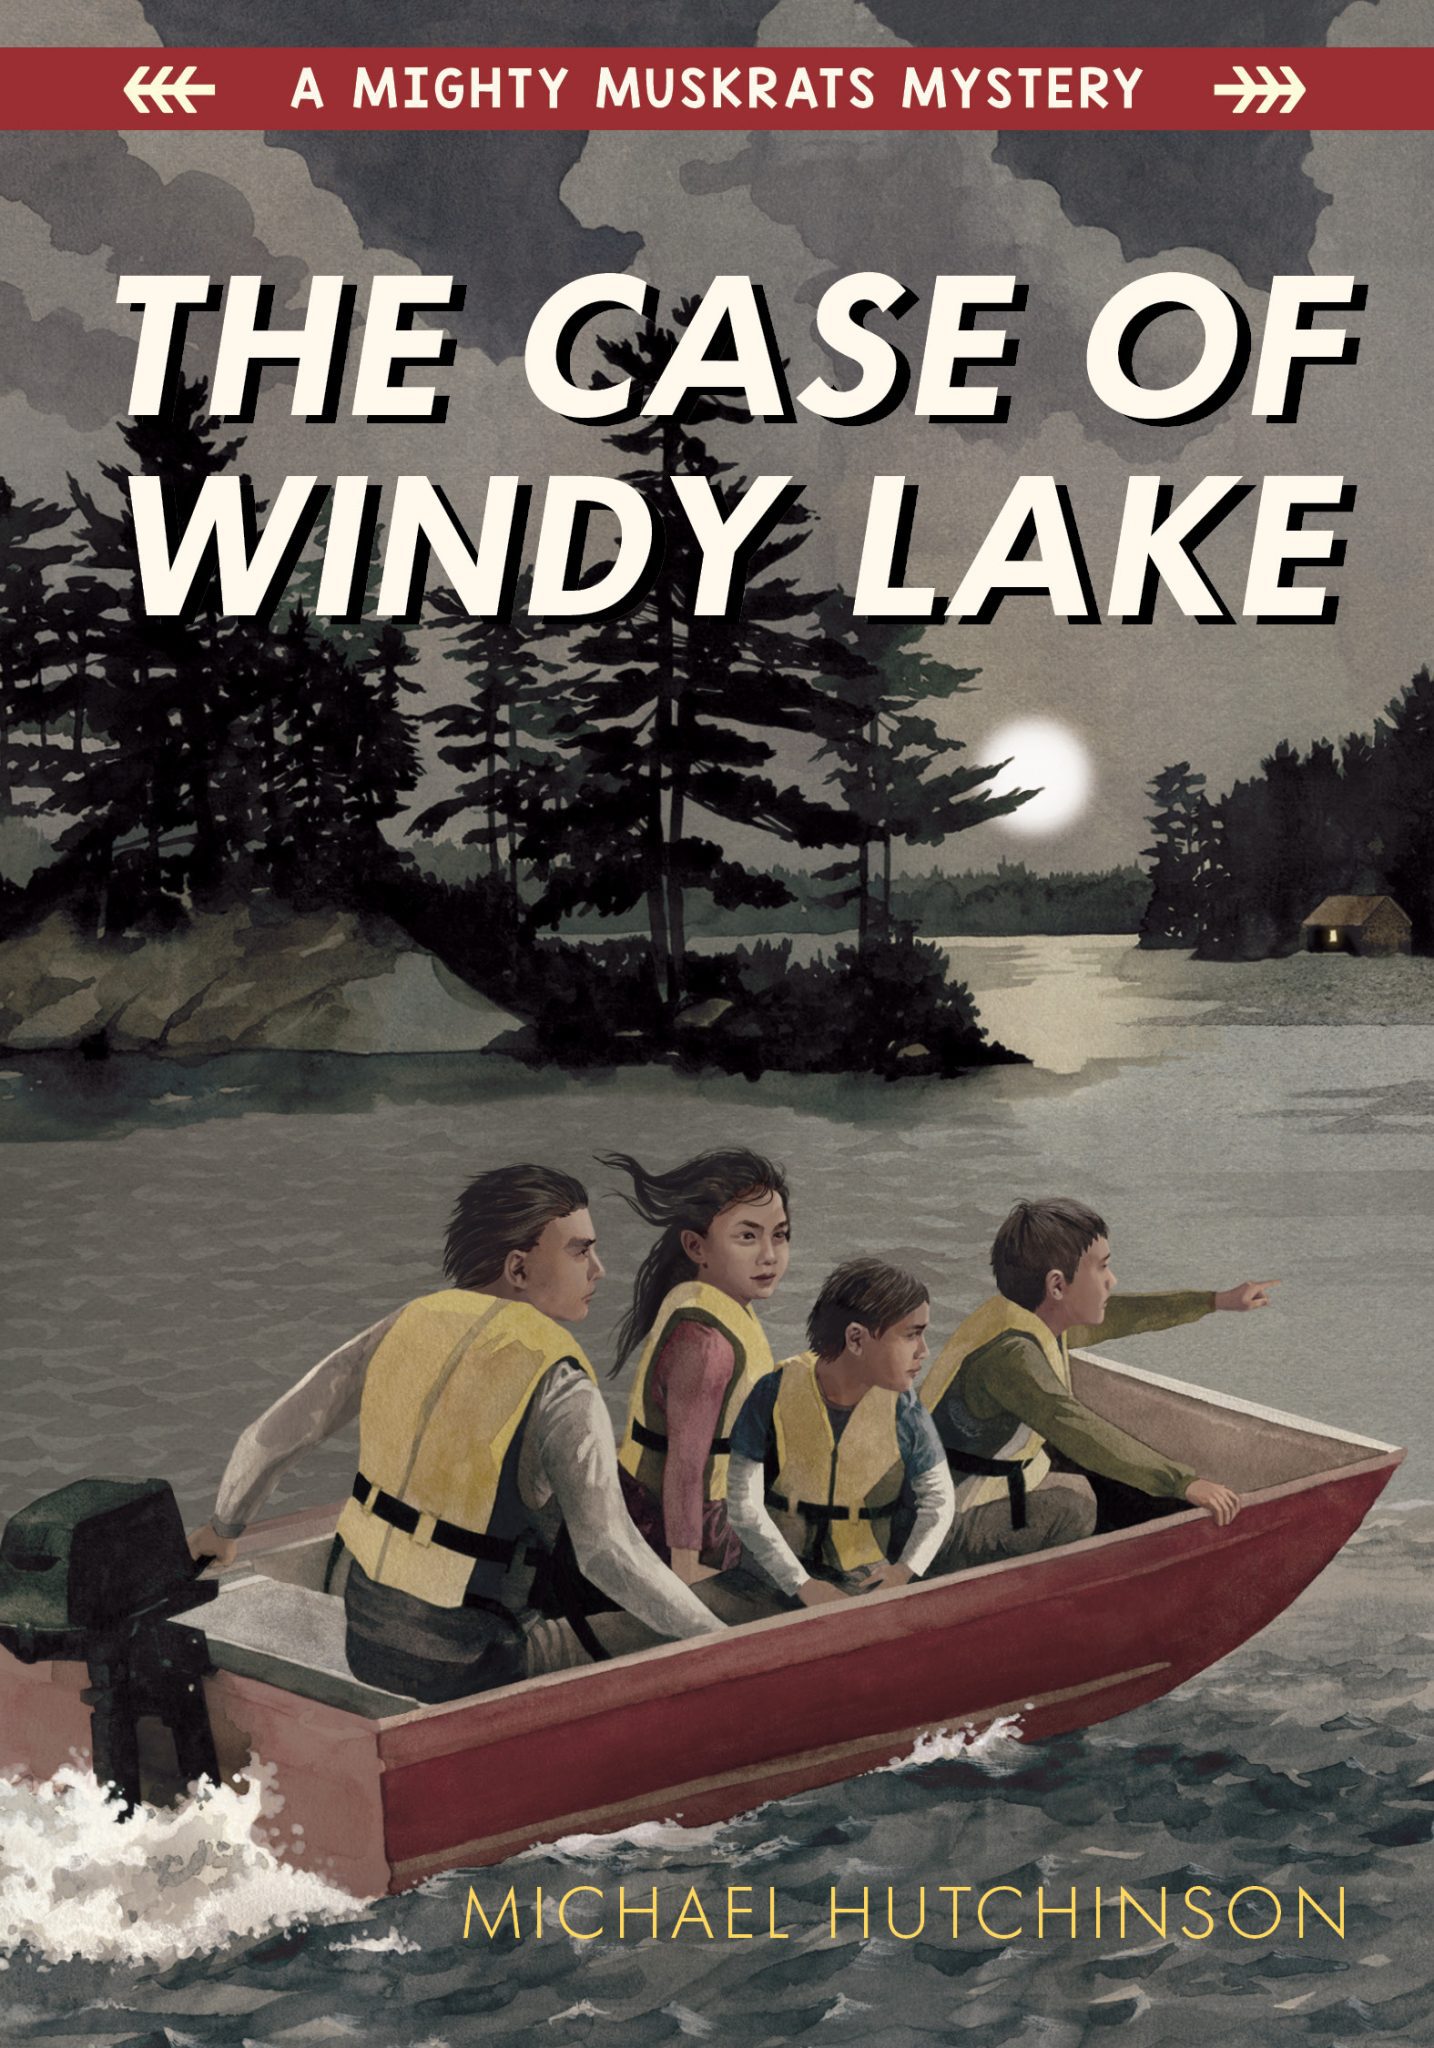 Book cover - A Mighty Muskrats Mystery: The Case of Windy Lake by Michael Hutchinson